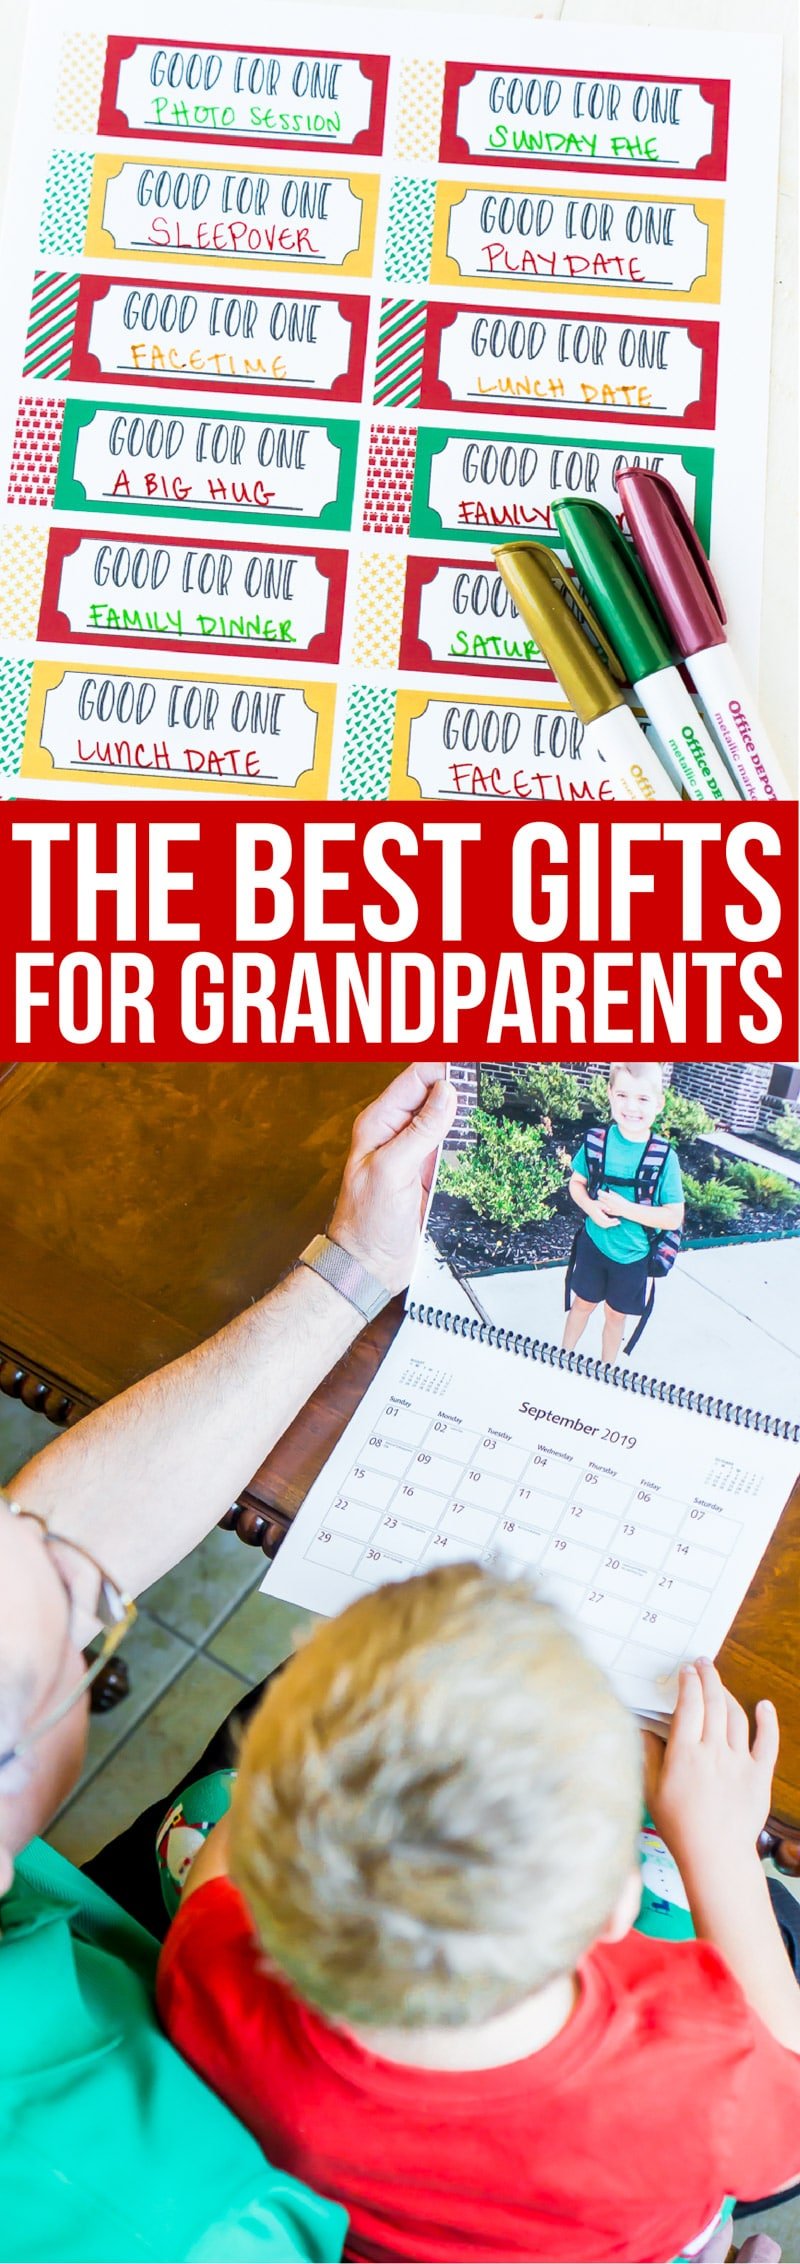 A collage of images of the best gifts for grandparents